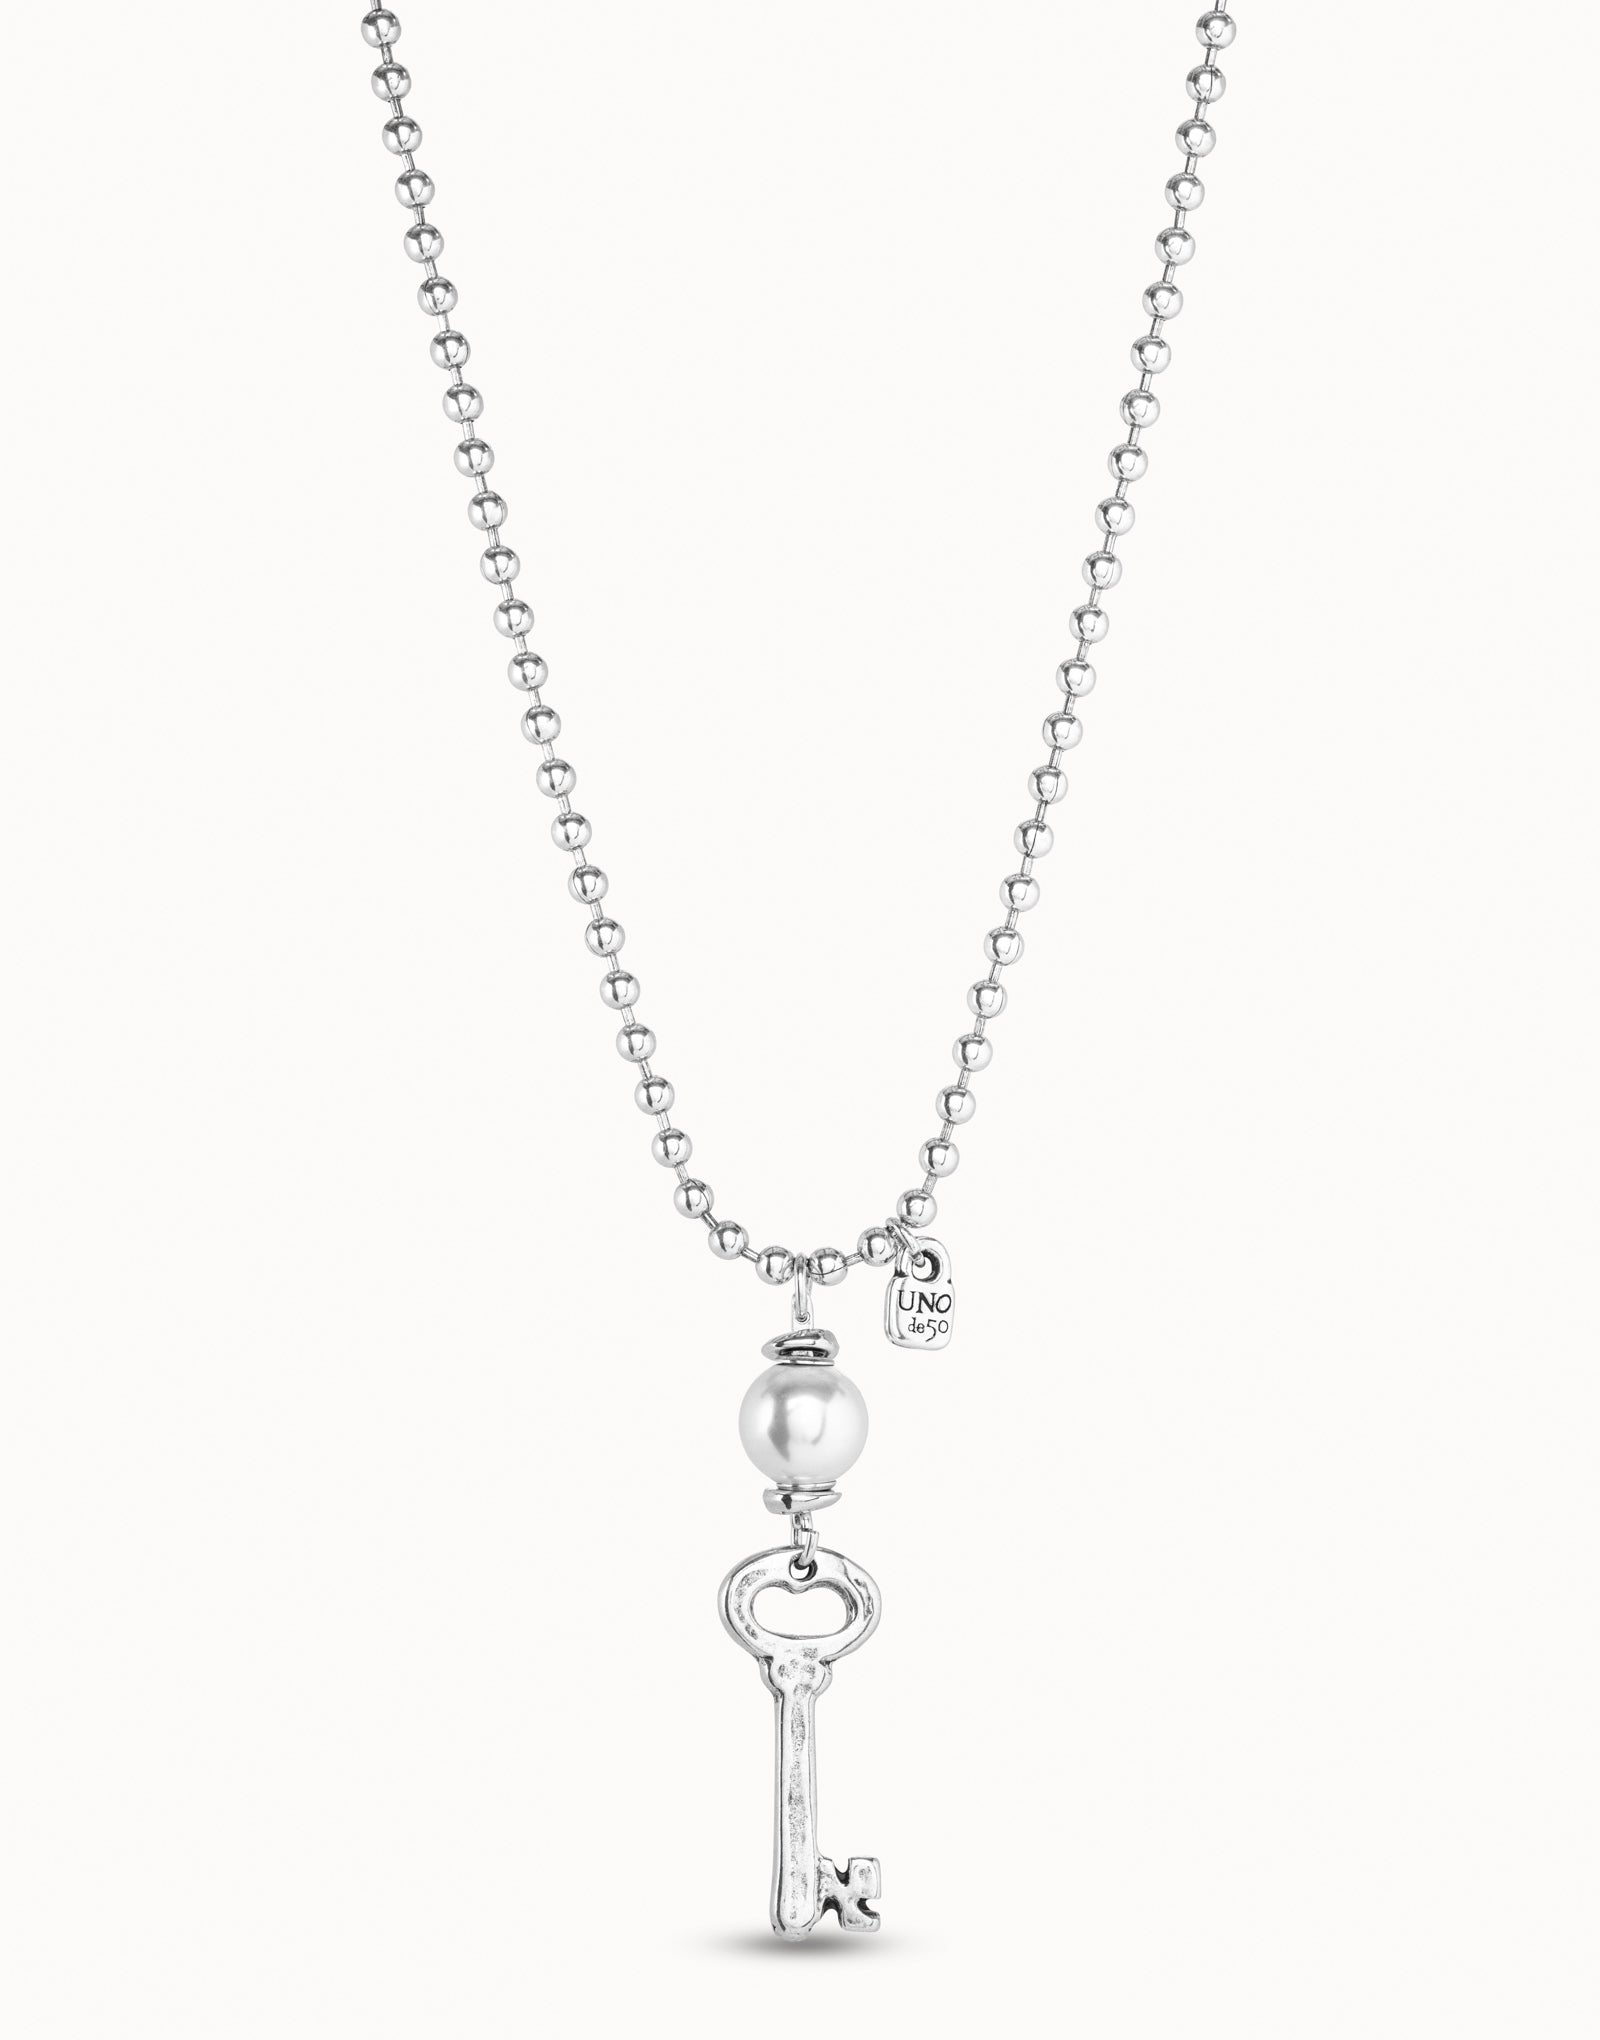 Silver Plate Necklace with Key and Pearl